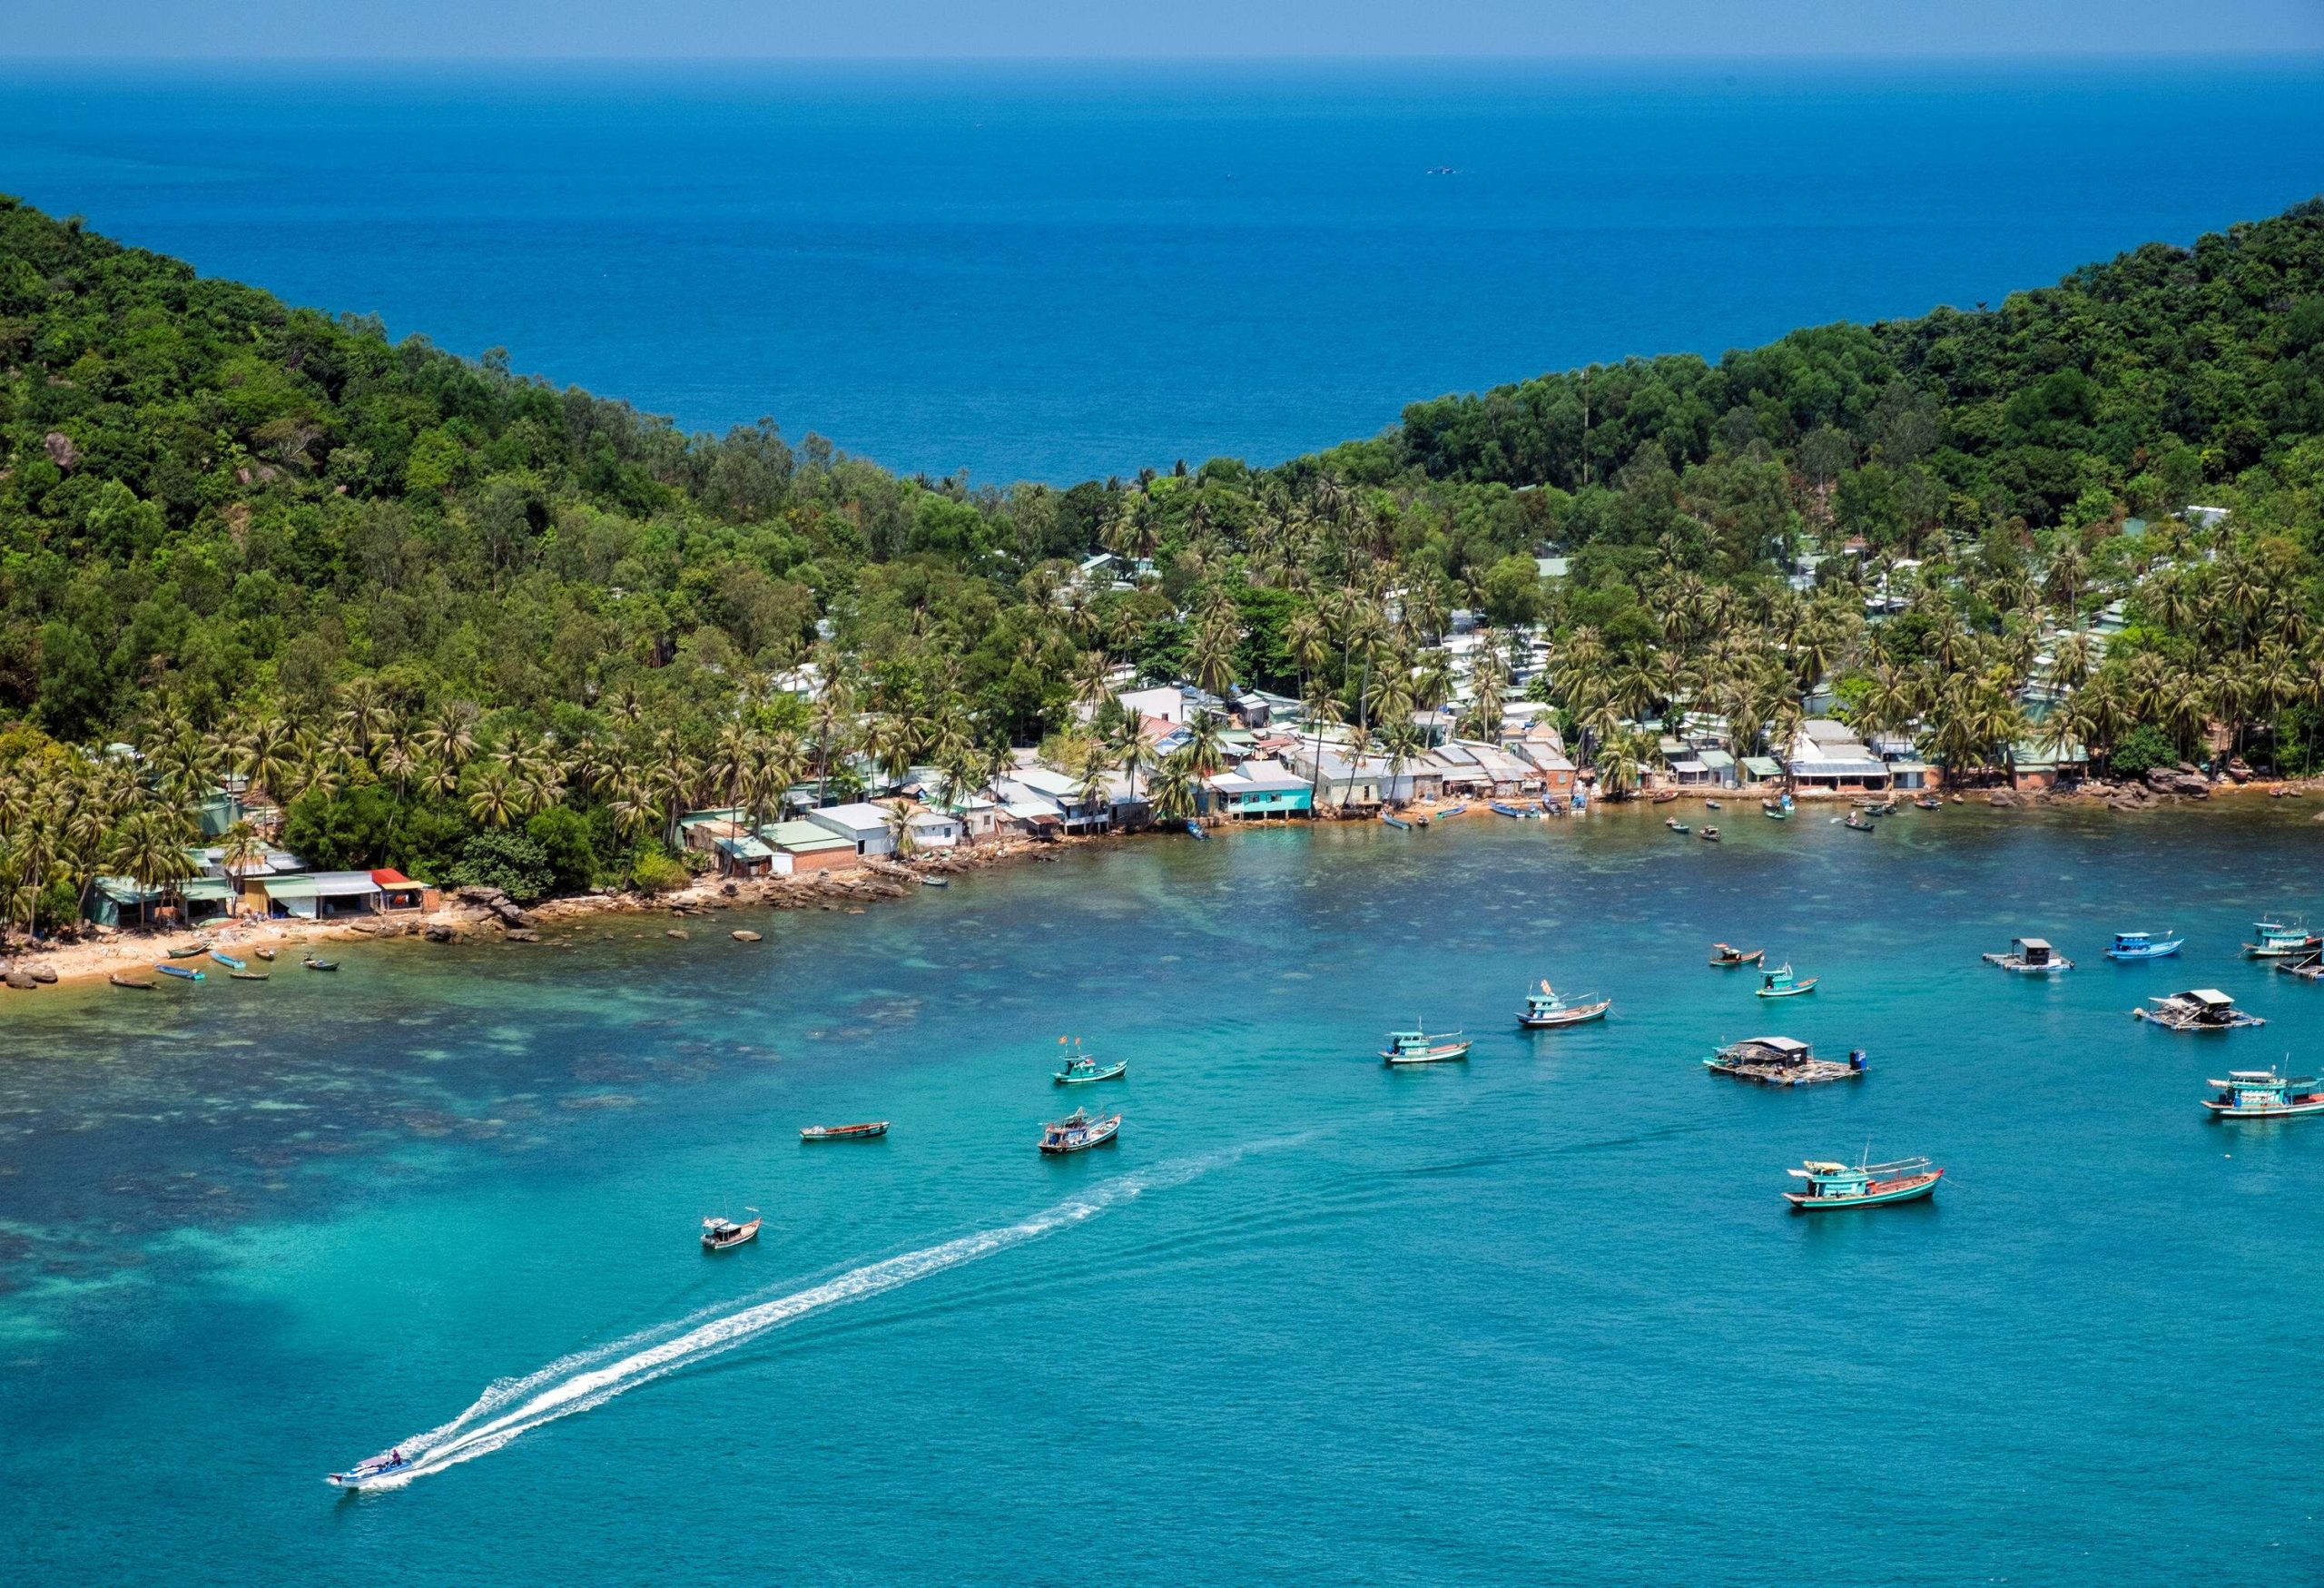 A picturesque village nestled on the slopes of a lush island, with moored boats dotting the serene coastline.